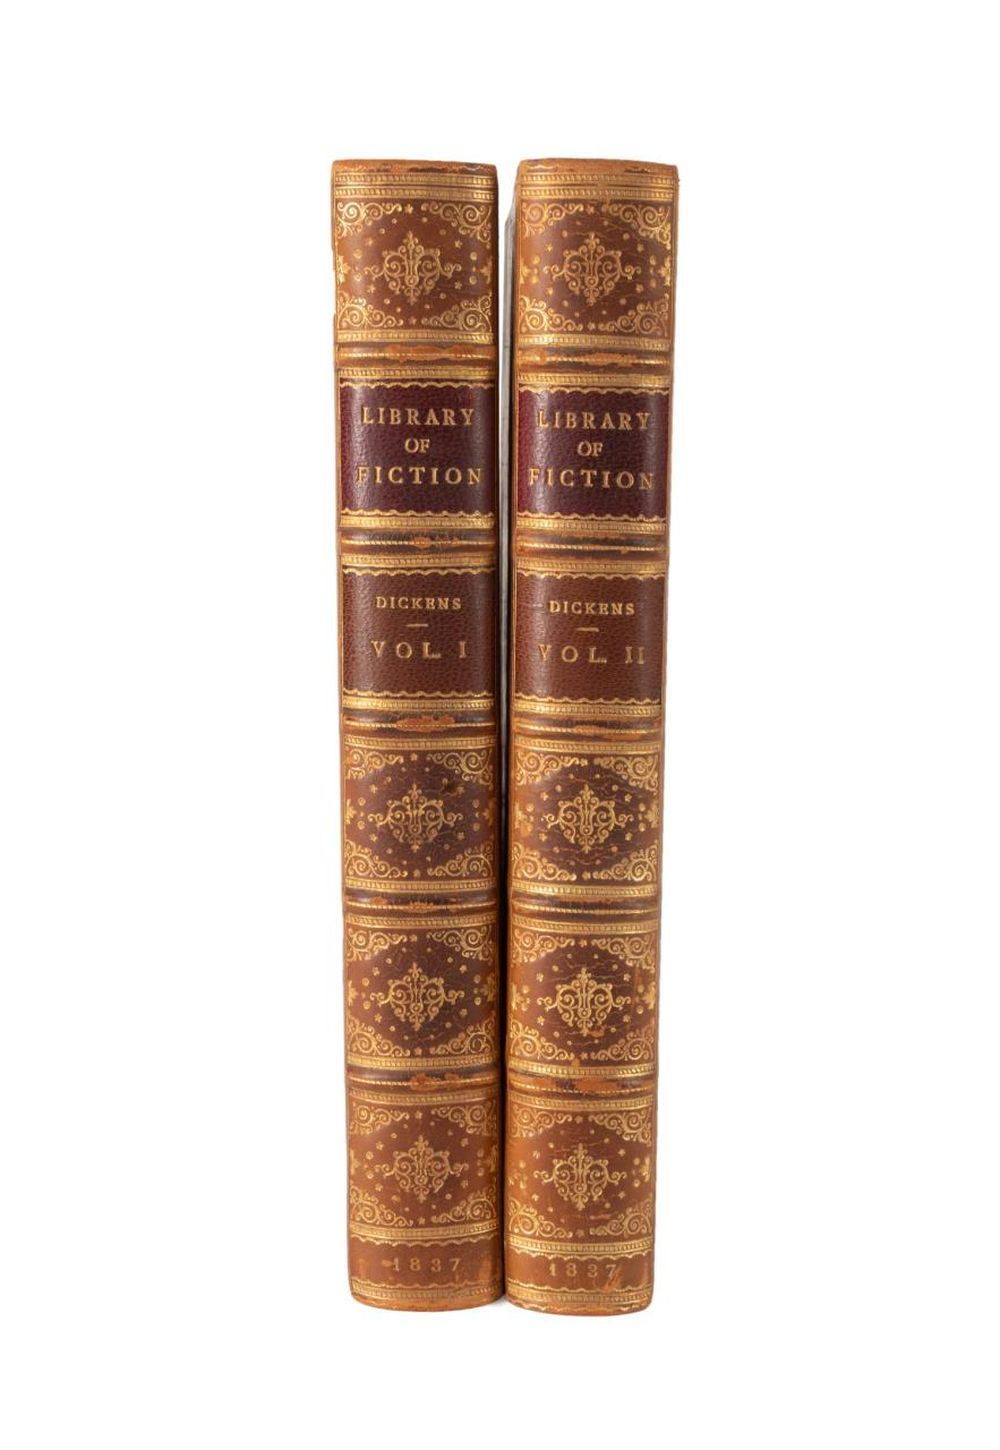 2VOL C DICKENS LIBRARY OF FICTION 3cd53d